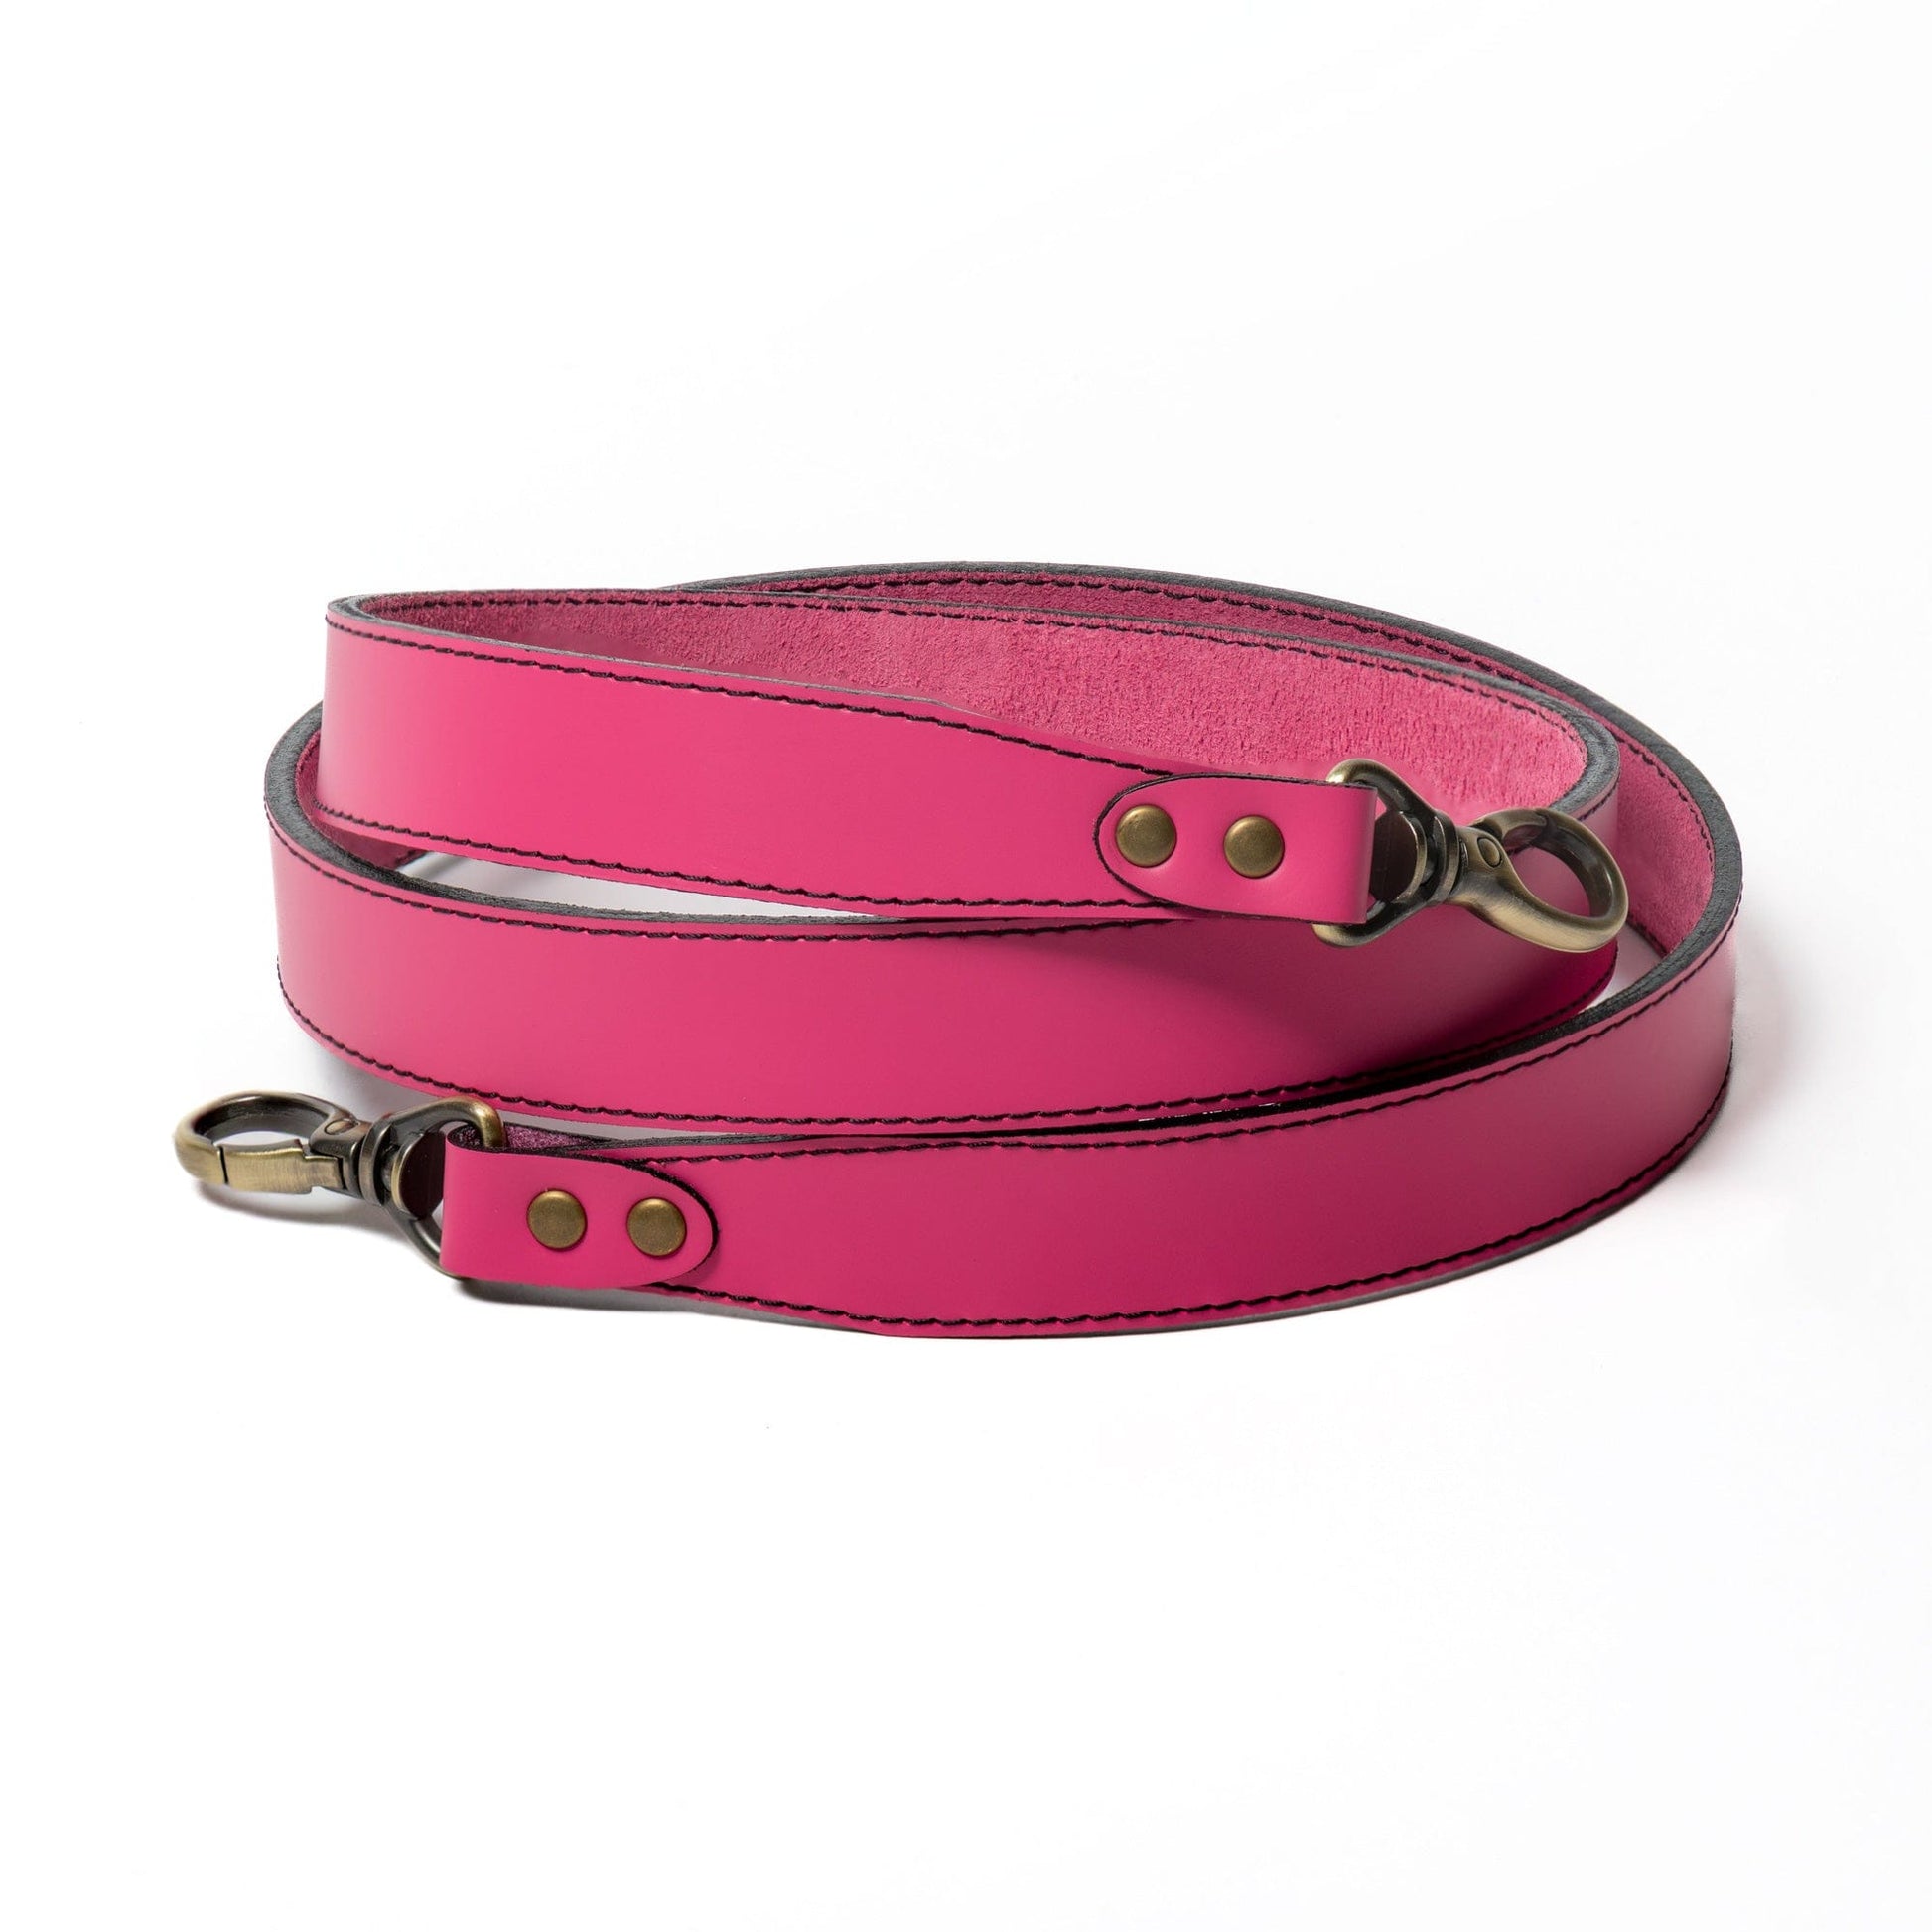 Hot Pink Leather Purse Strap 1 Crossbody Suede Lining